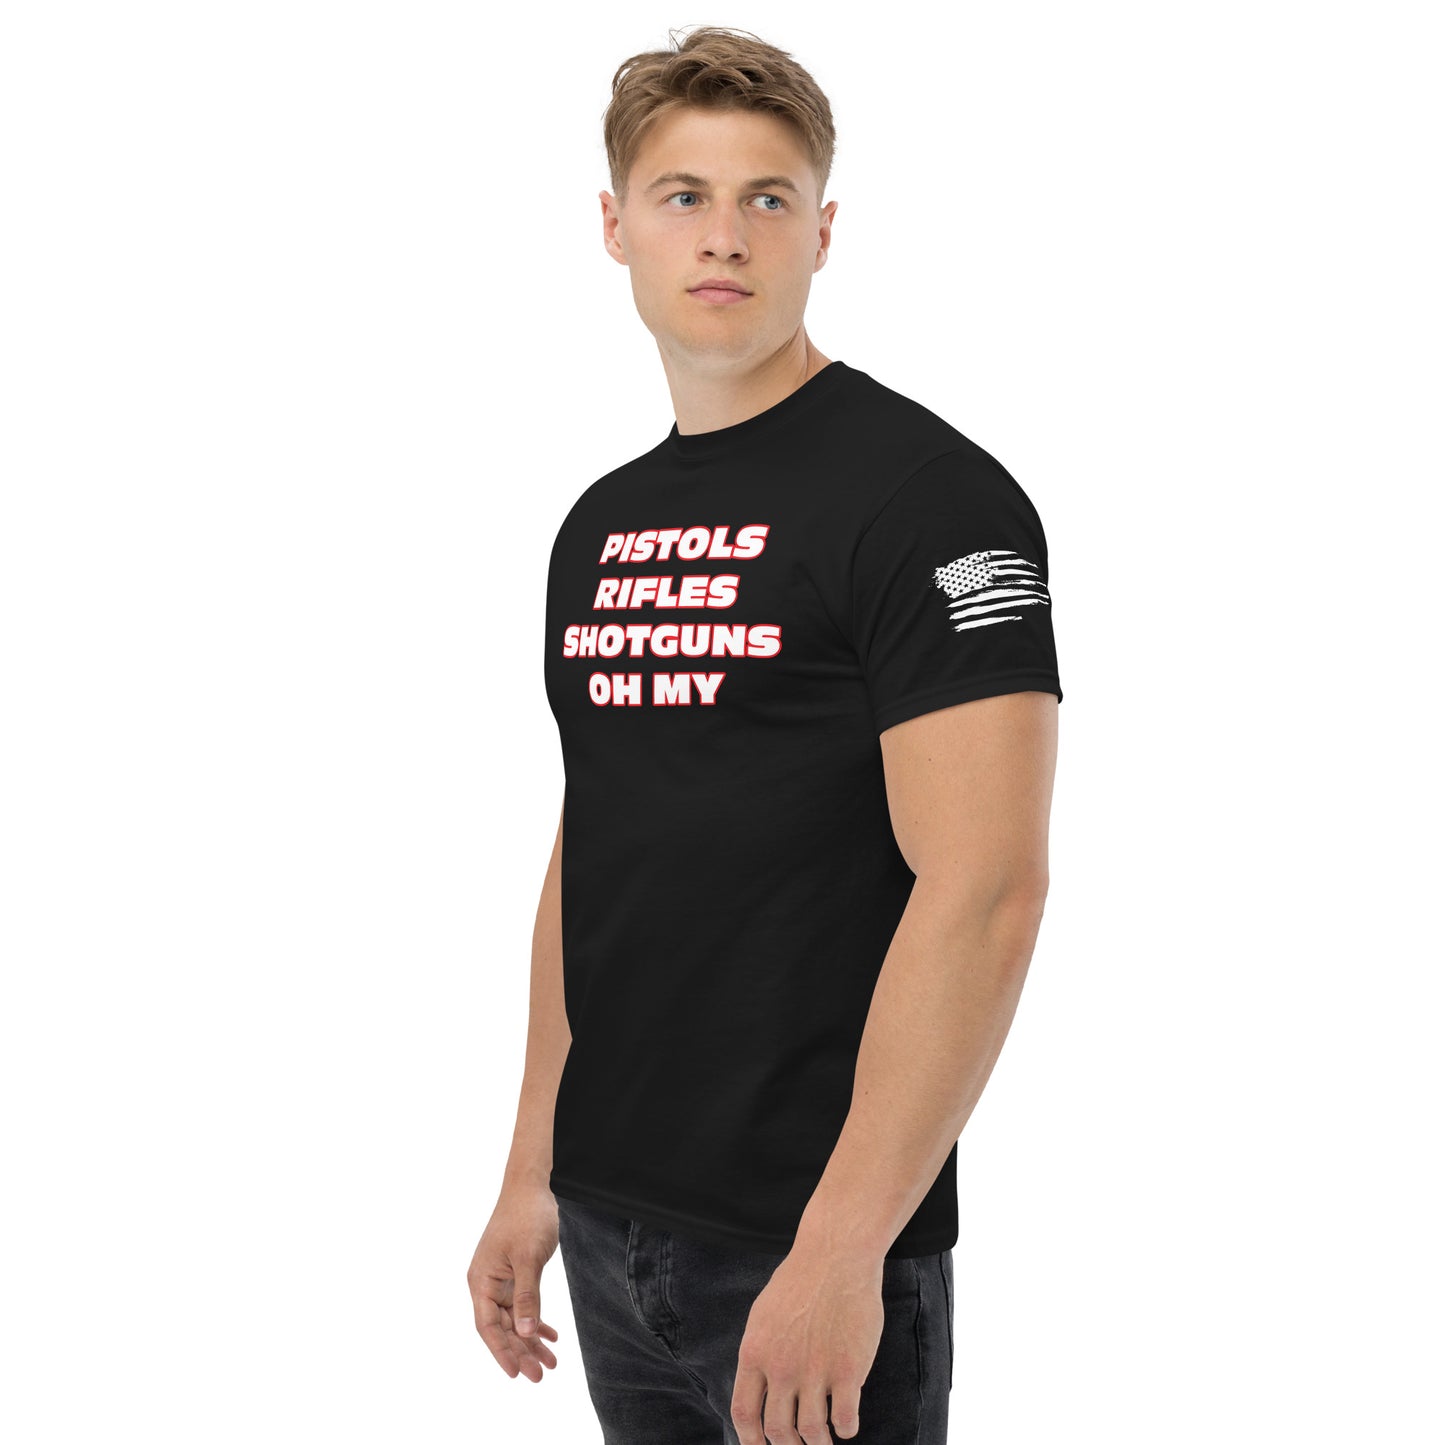 Pistols Rifles Shotguns oh my!!  Show Your Love of Shooting Sport With This BOD Unisex T-Shirt